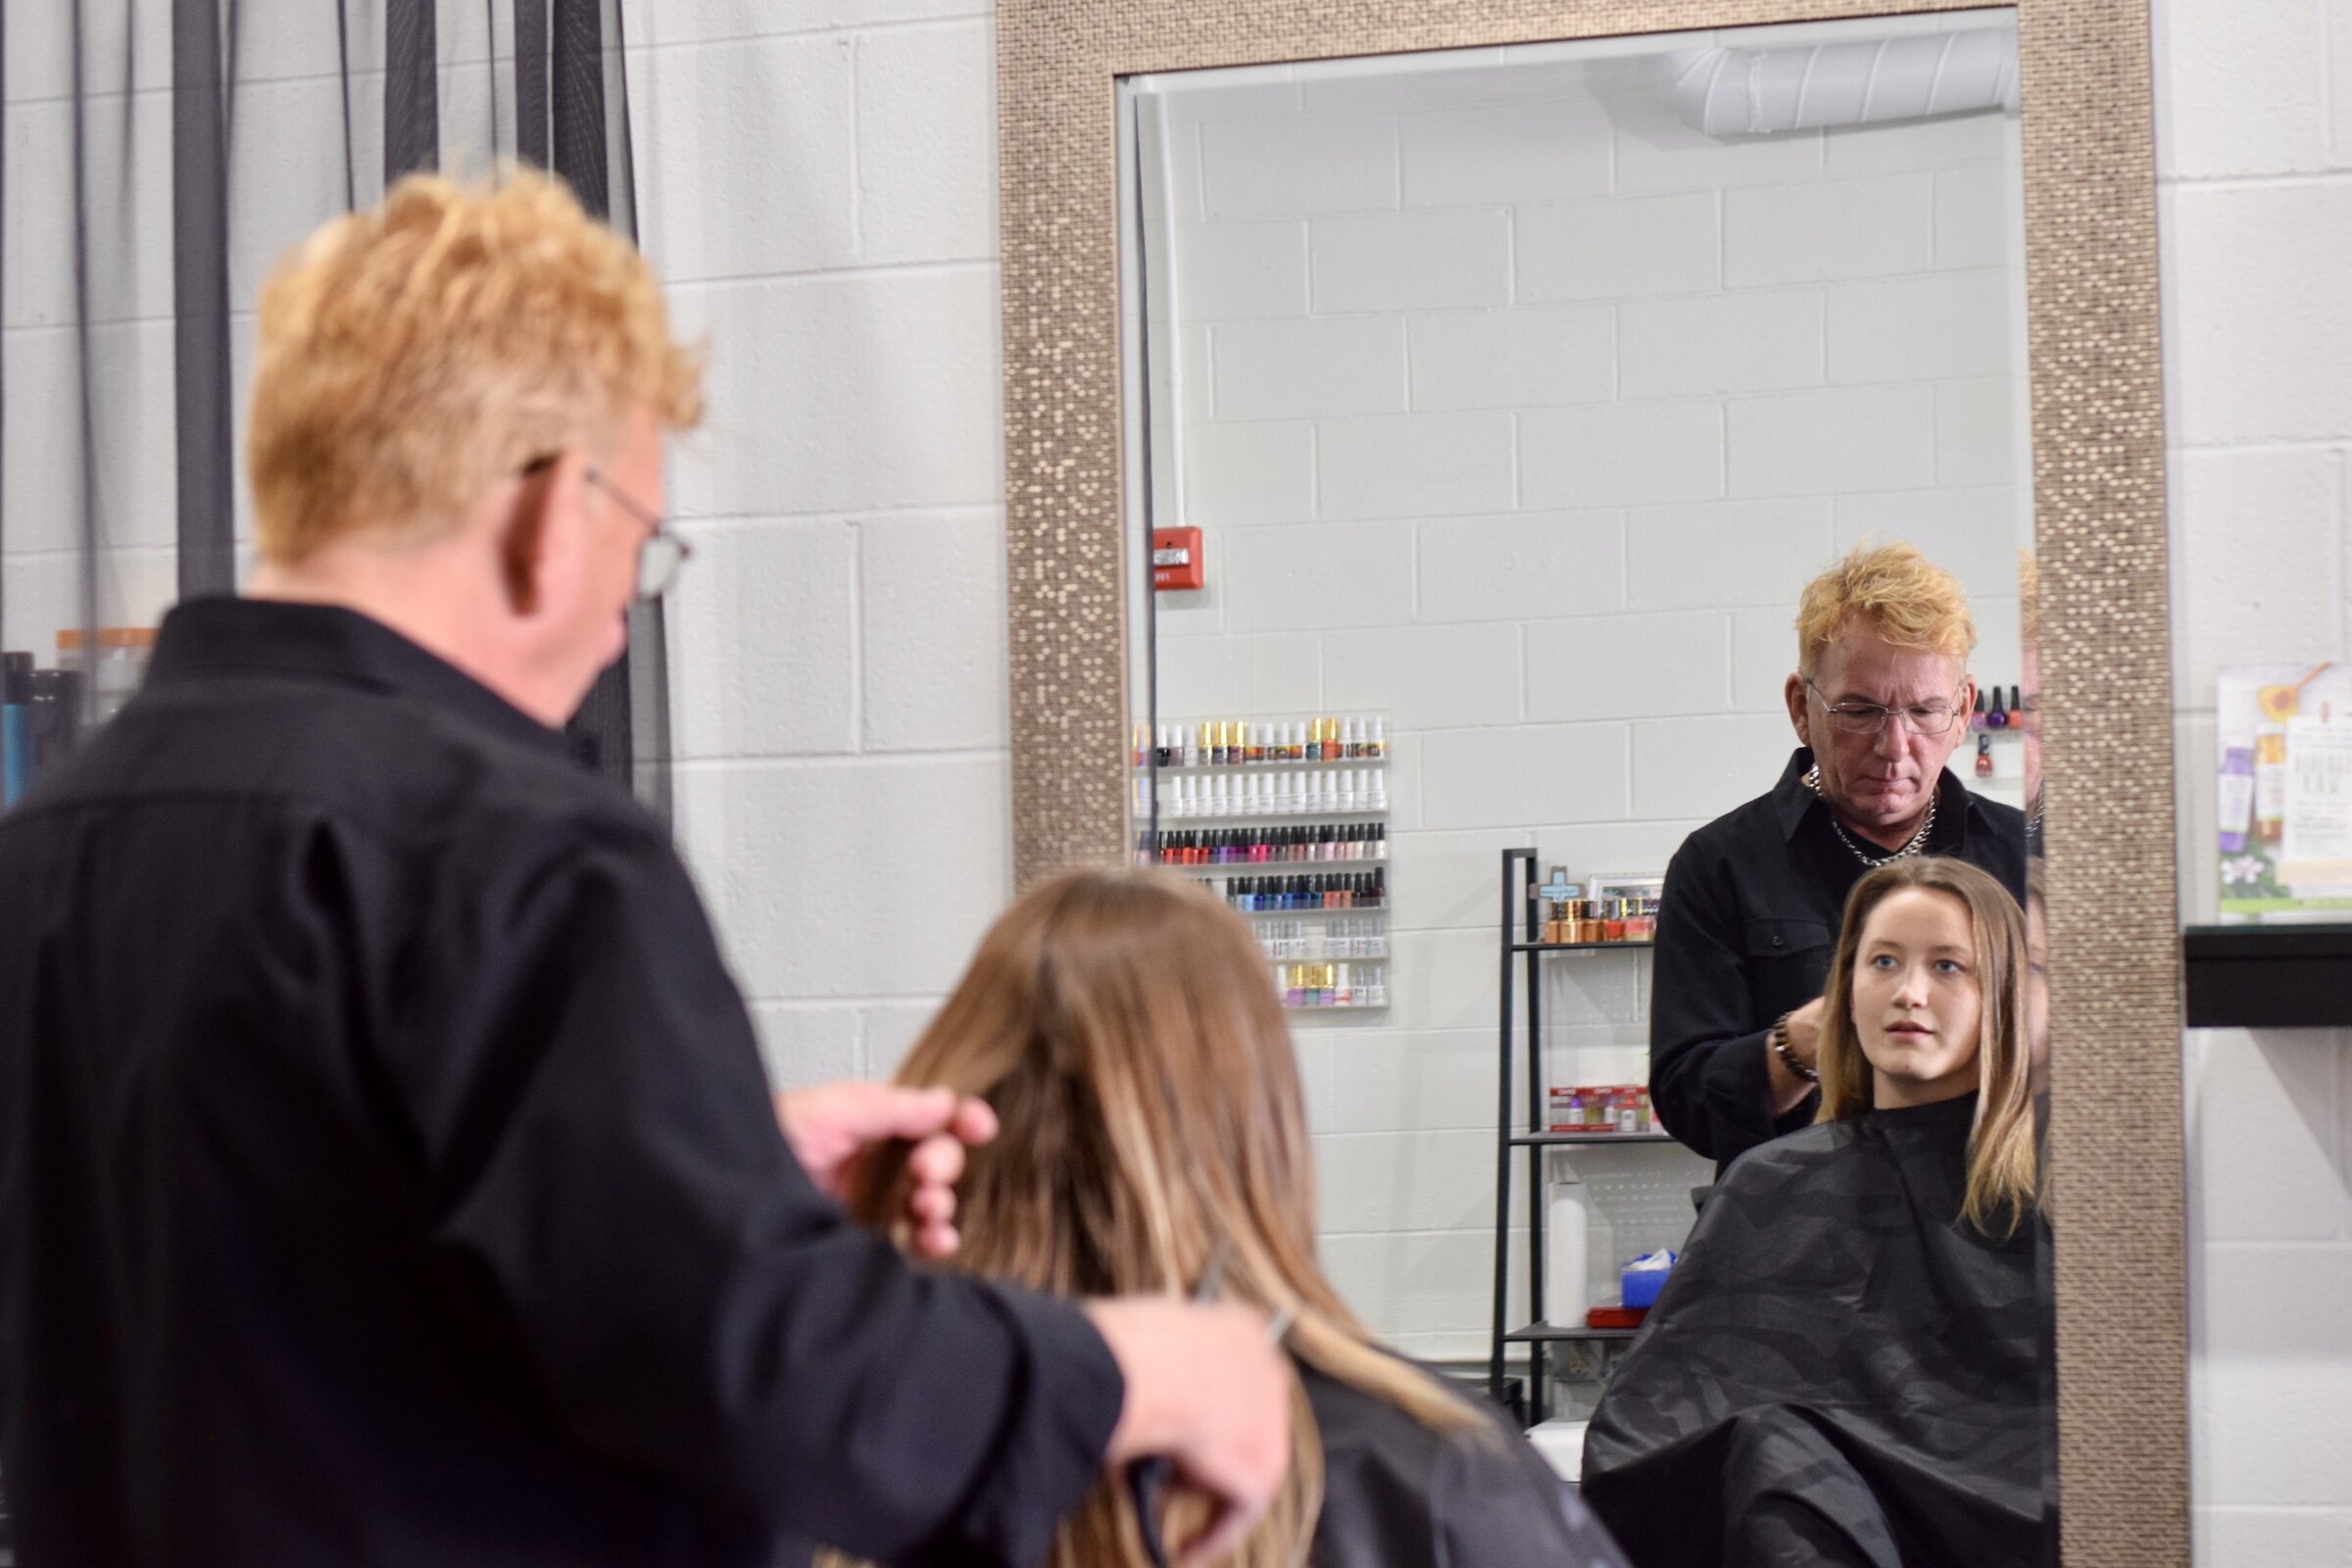 Michael Schram, owner of Michael Michael's Salon and Spa, styles a client's hair.